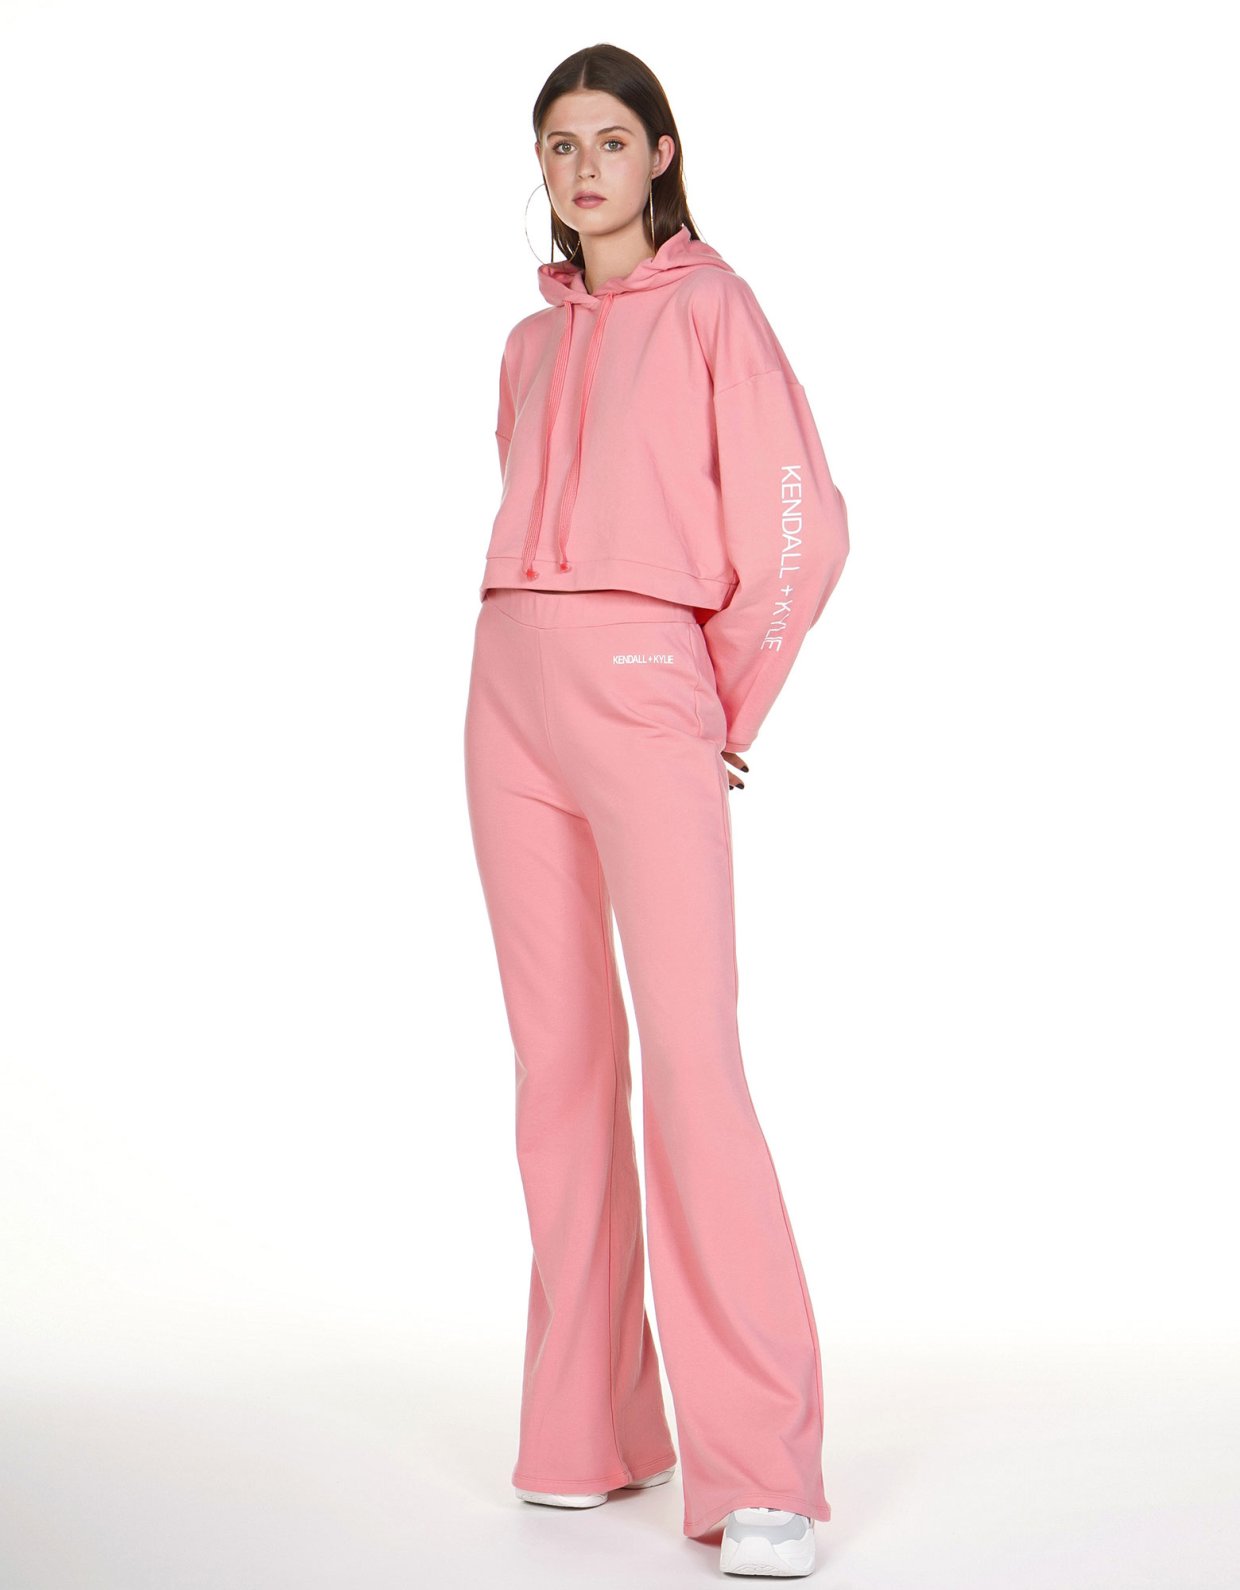 Kendall + Kylie Flared sweatpants rose pink